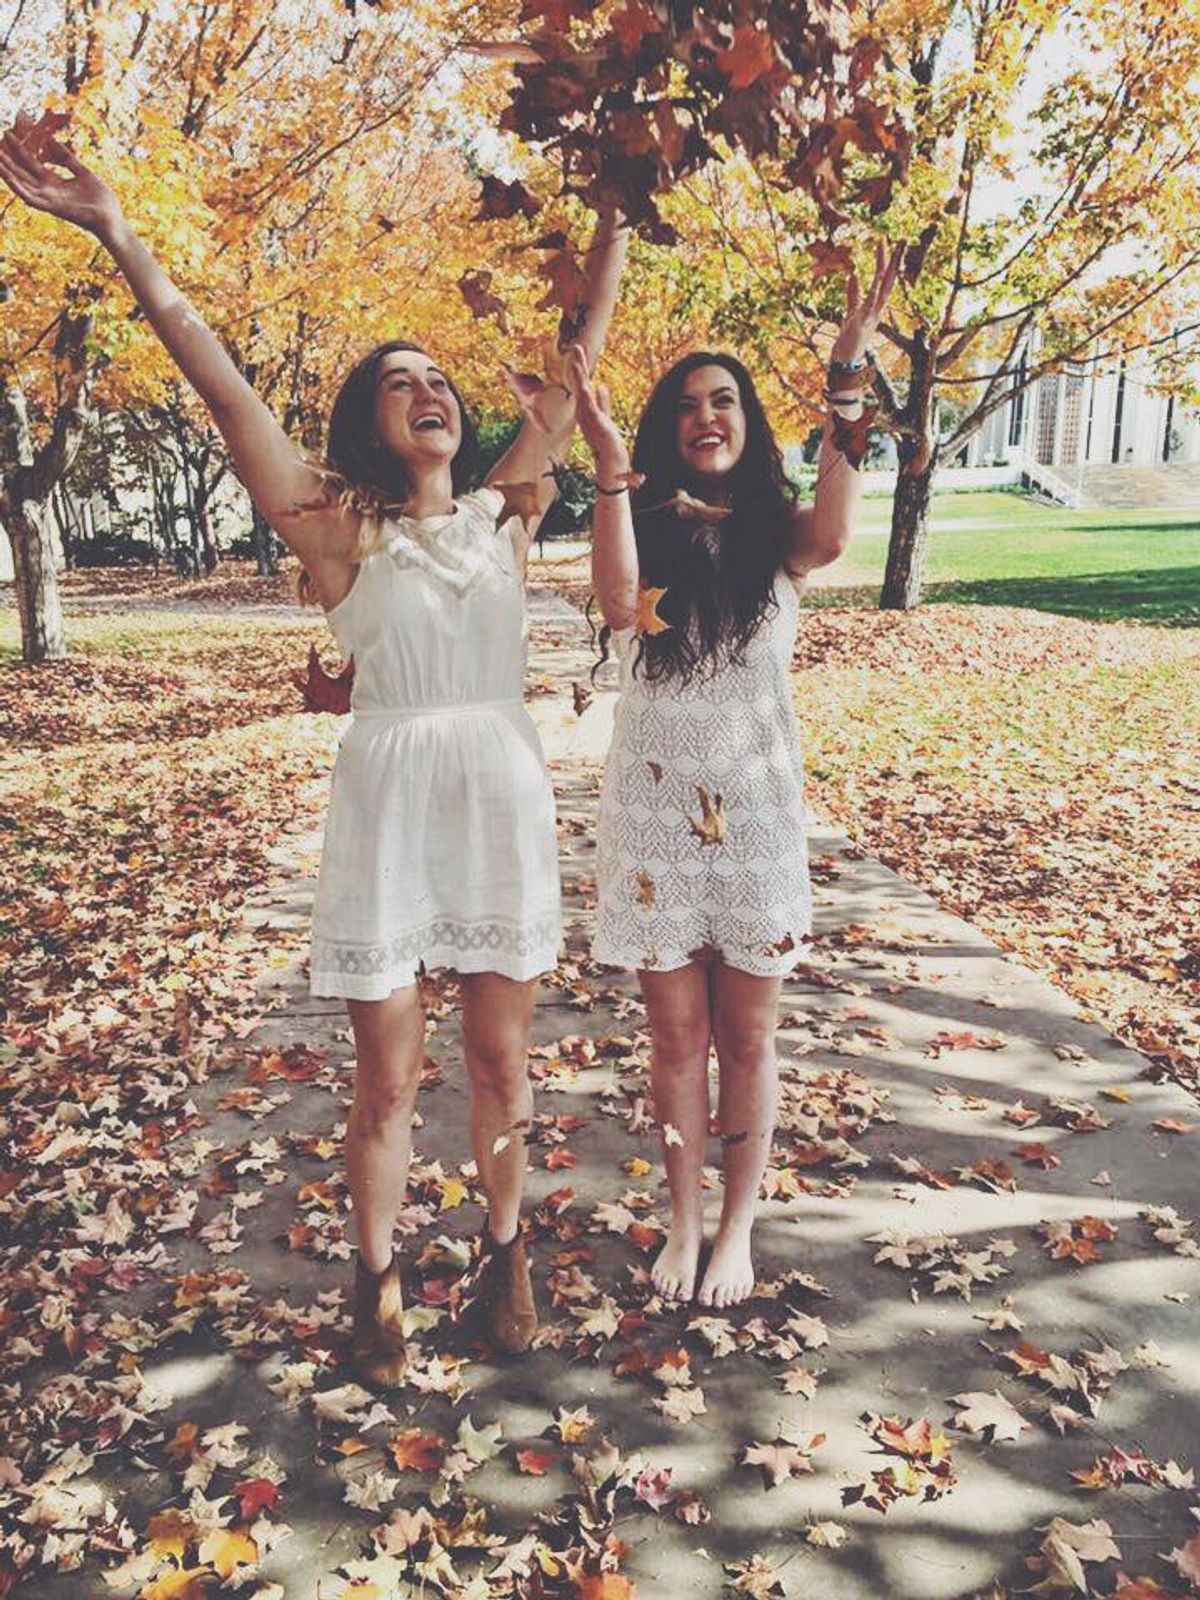 A Letter To The Newest Initiates Of Any Sorority